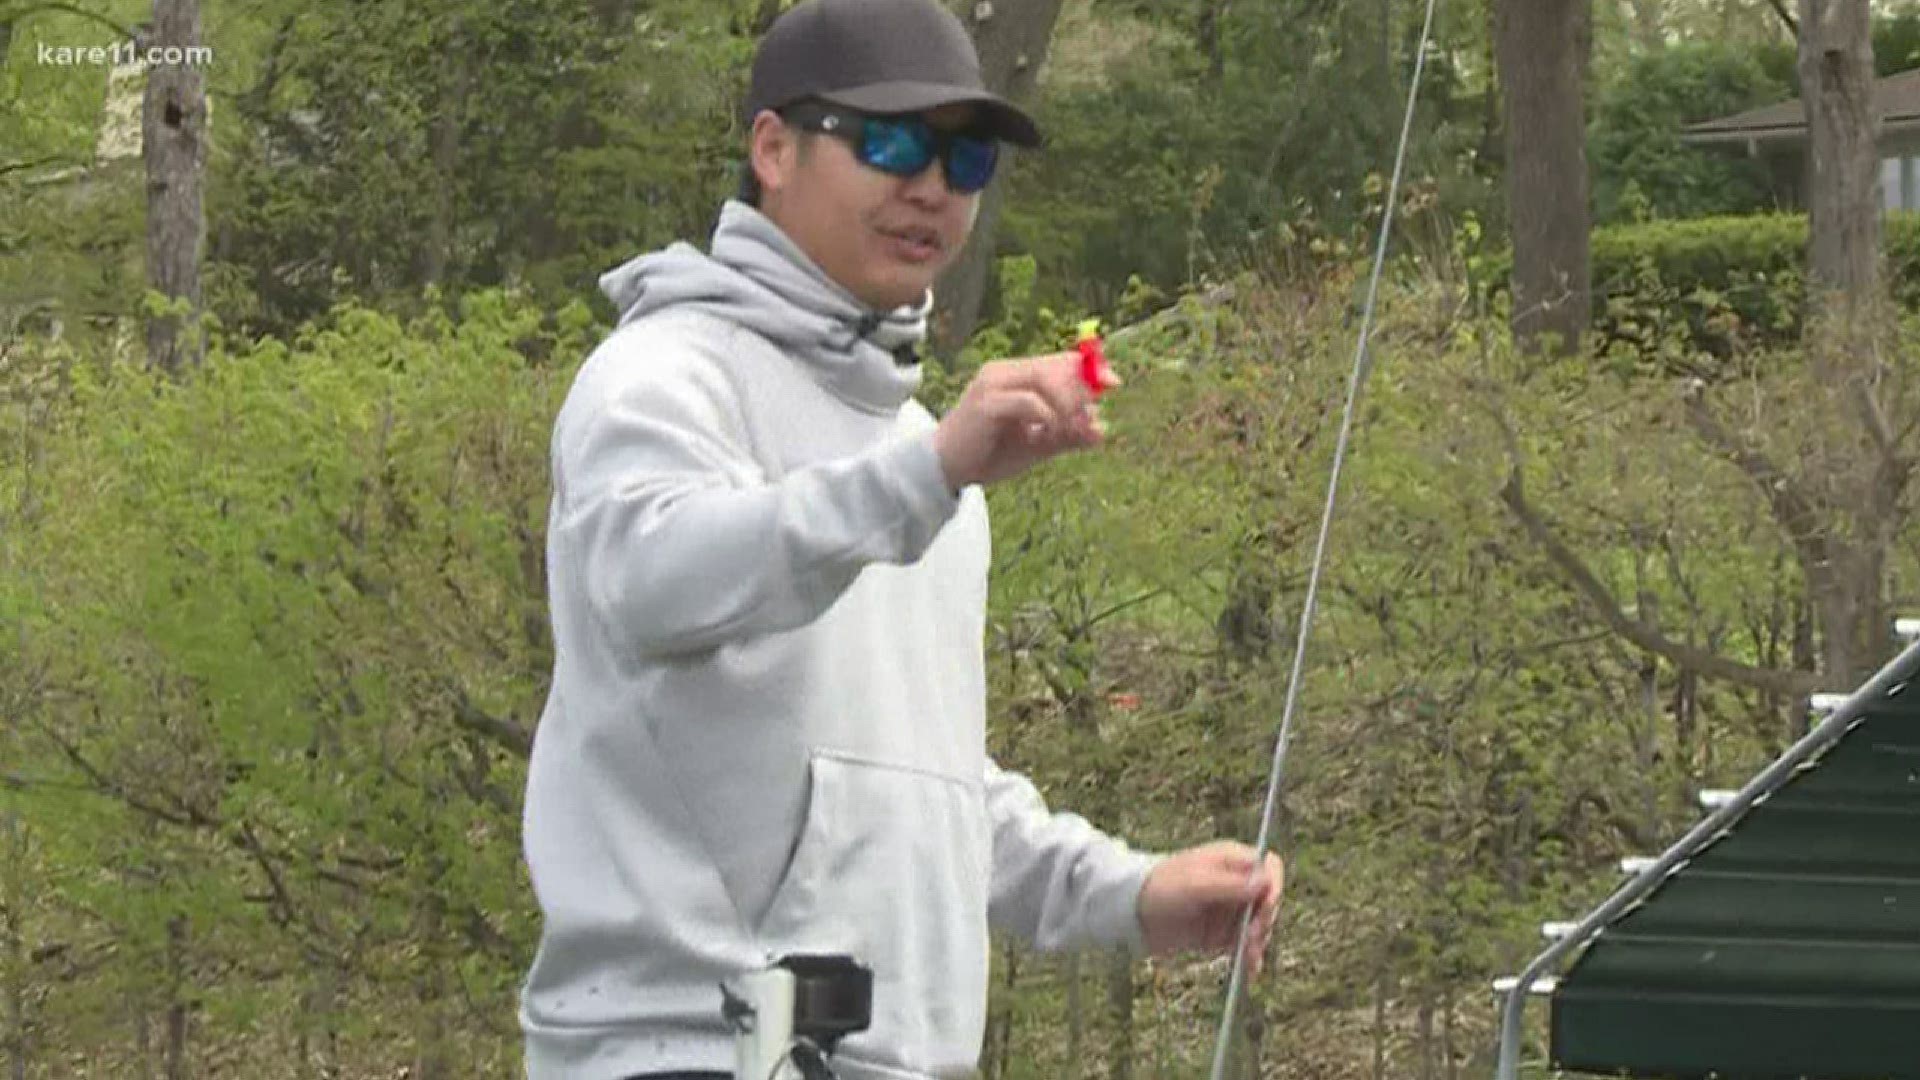 Learn some fishing tips from a Minnesota professional bass fisherman.